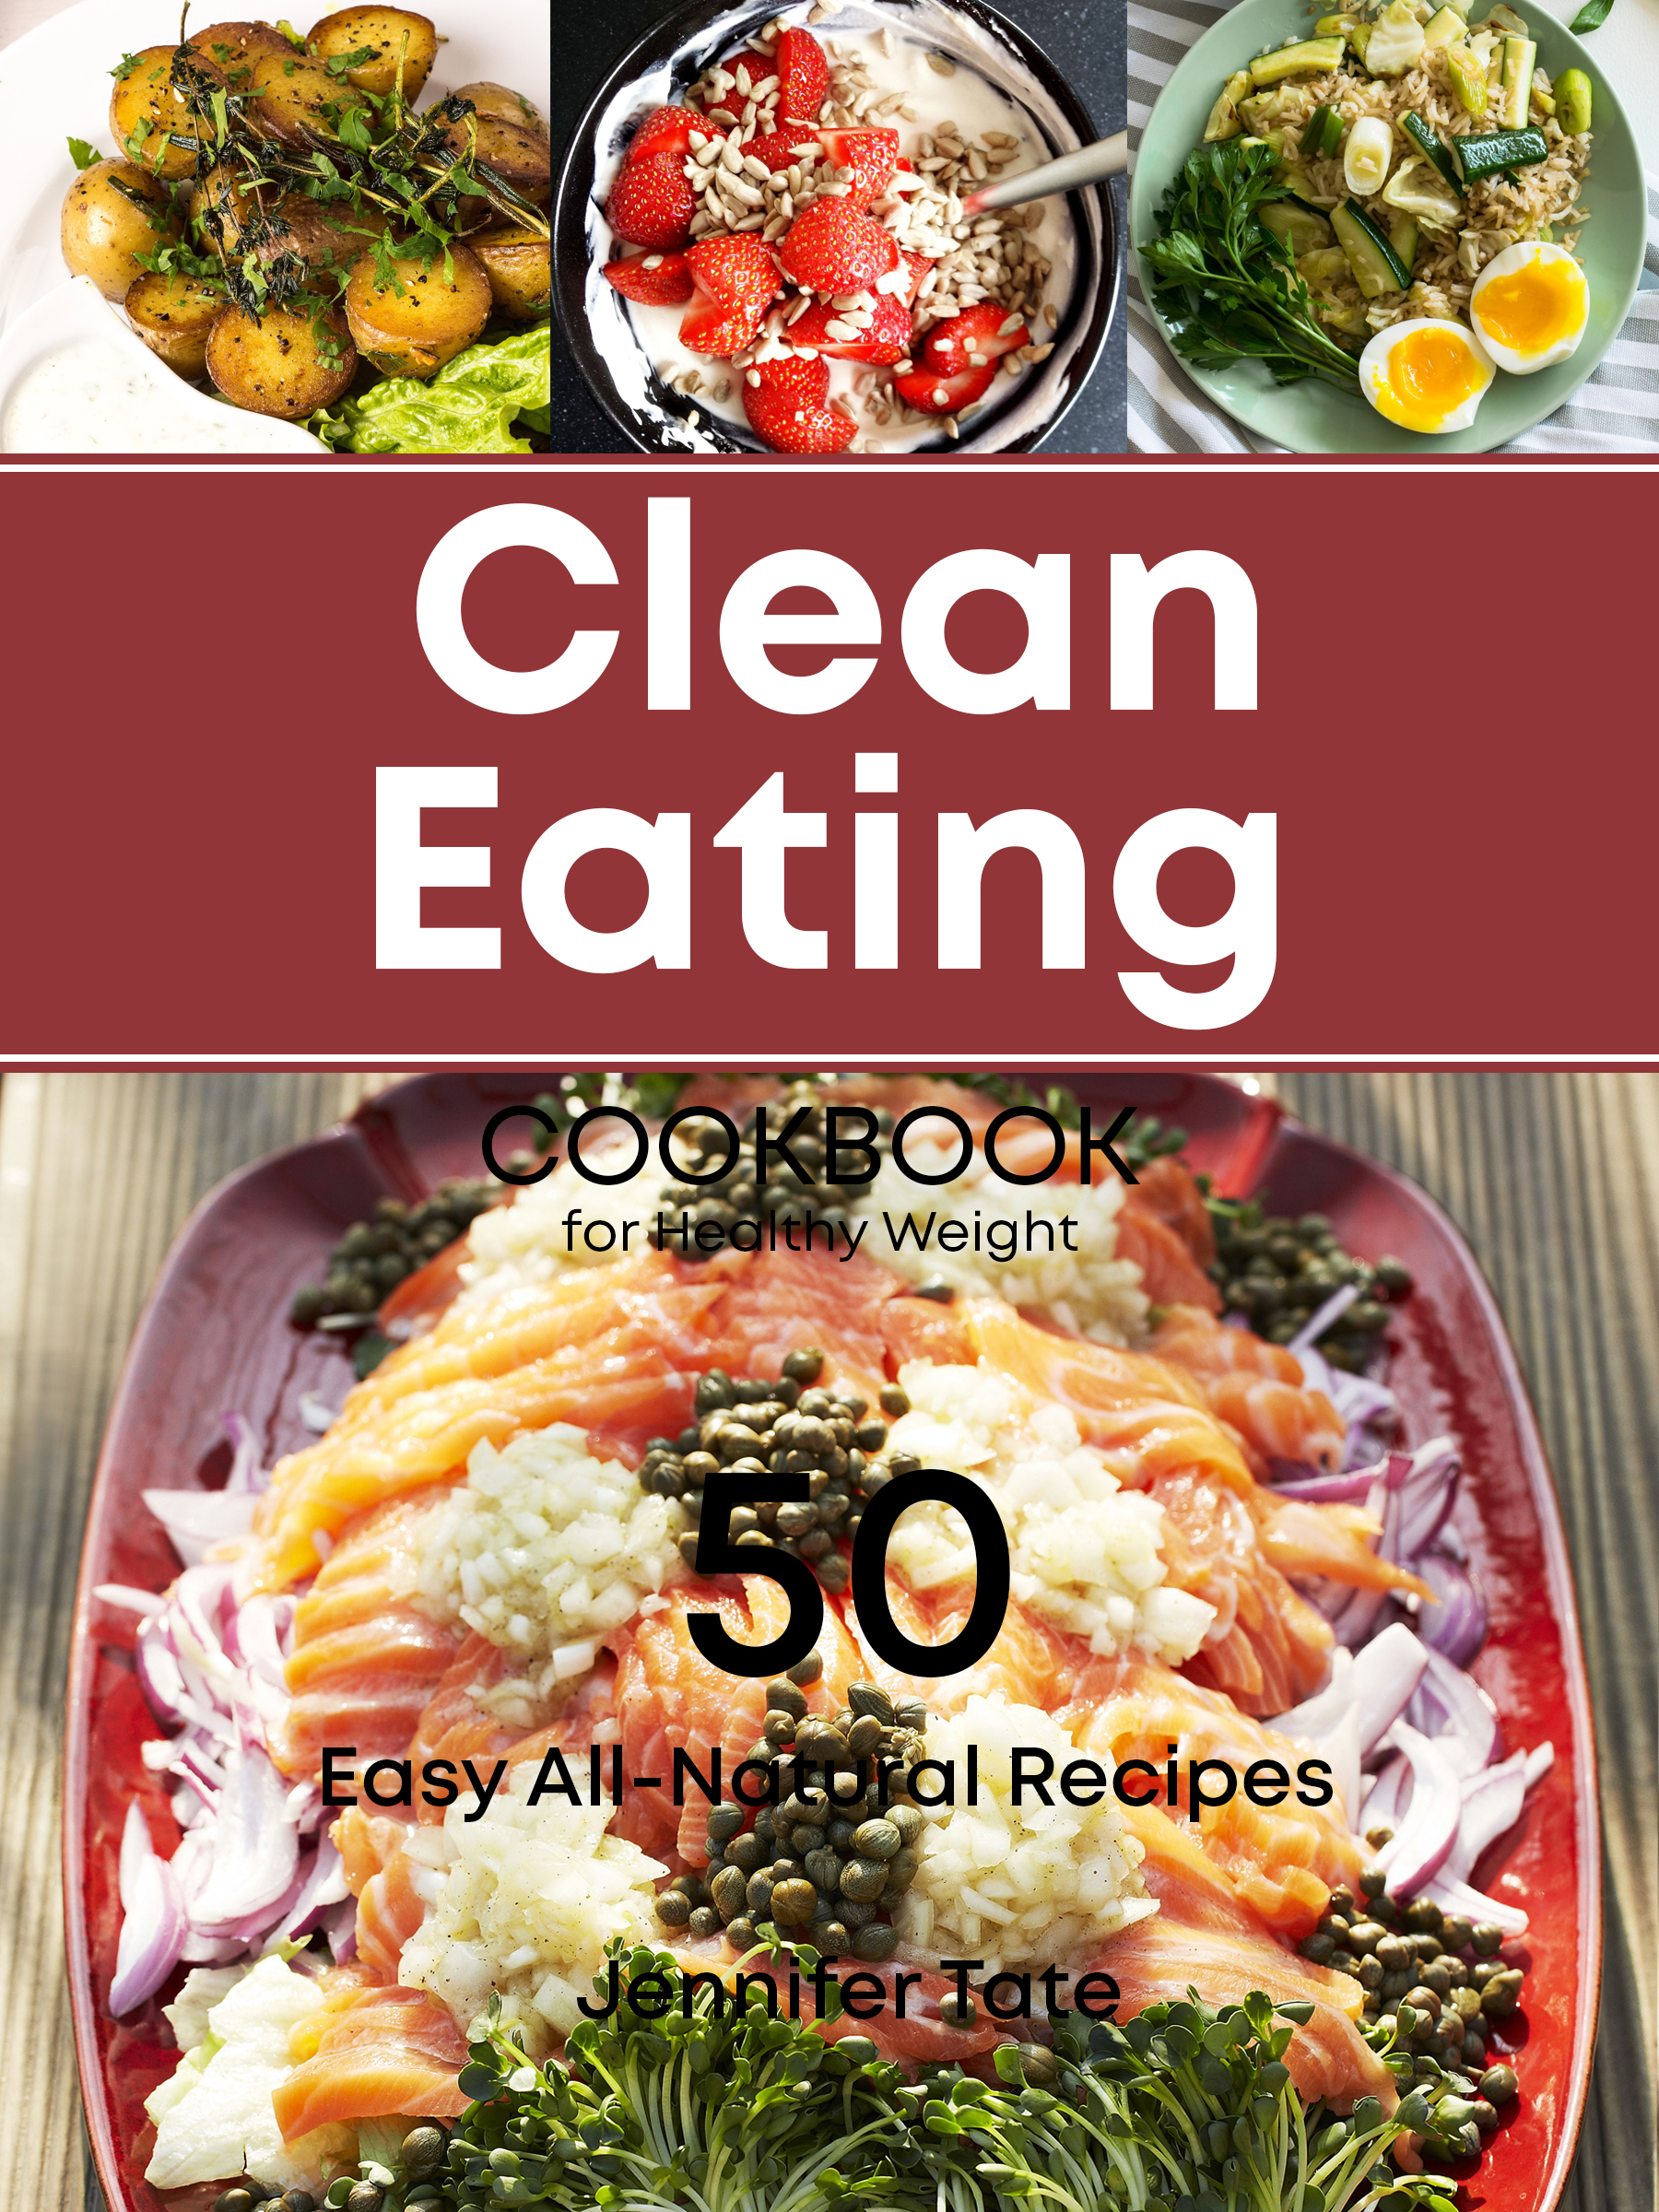 FREE: THE CLEAN EATING COOKBOOK FOR A HEALTHY WEIGHT: 50 Easy All-Natural Recipes for Working and Living Well by Jennifer Tate